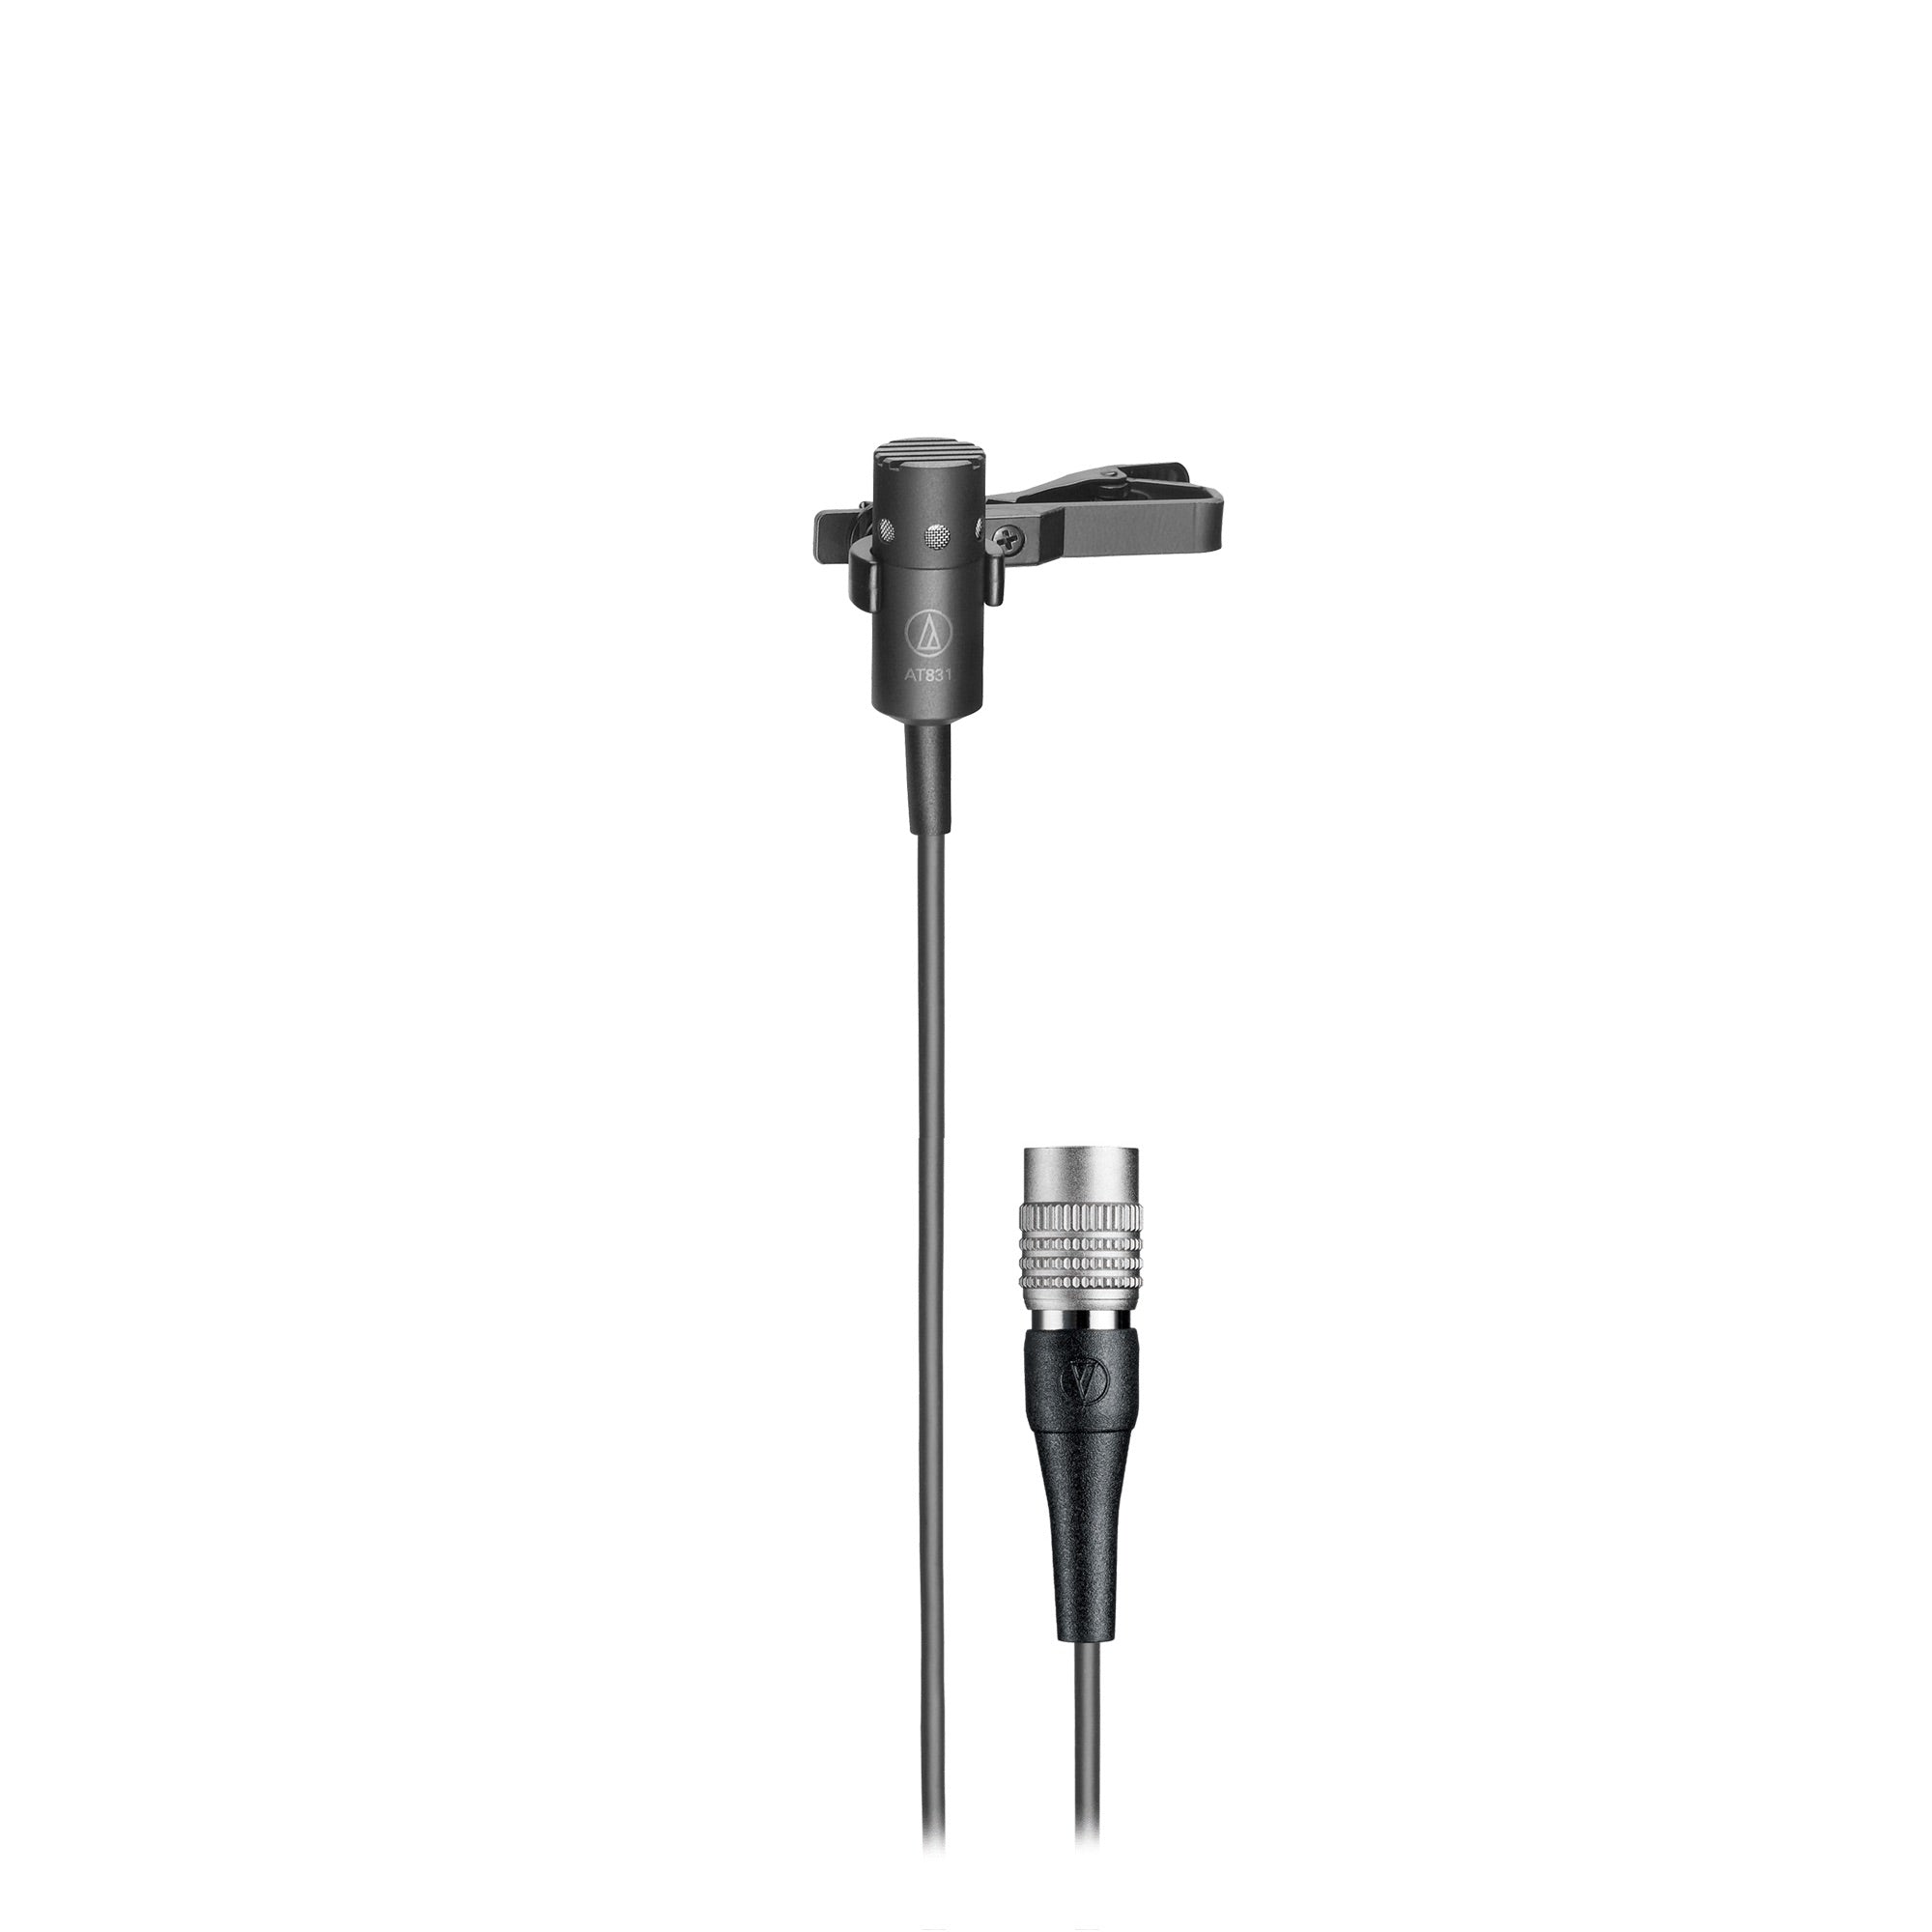 Audio-Technica AT831cW Cardioid Condenser Lavalier Microphone